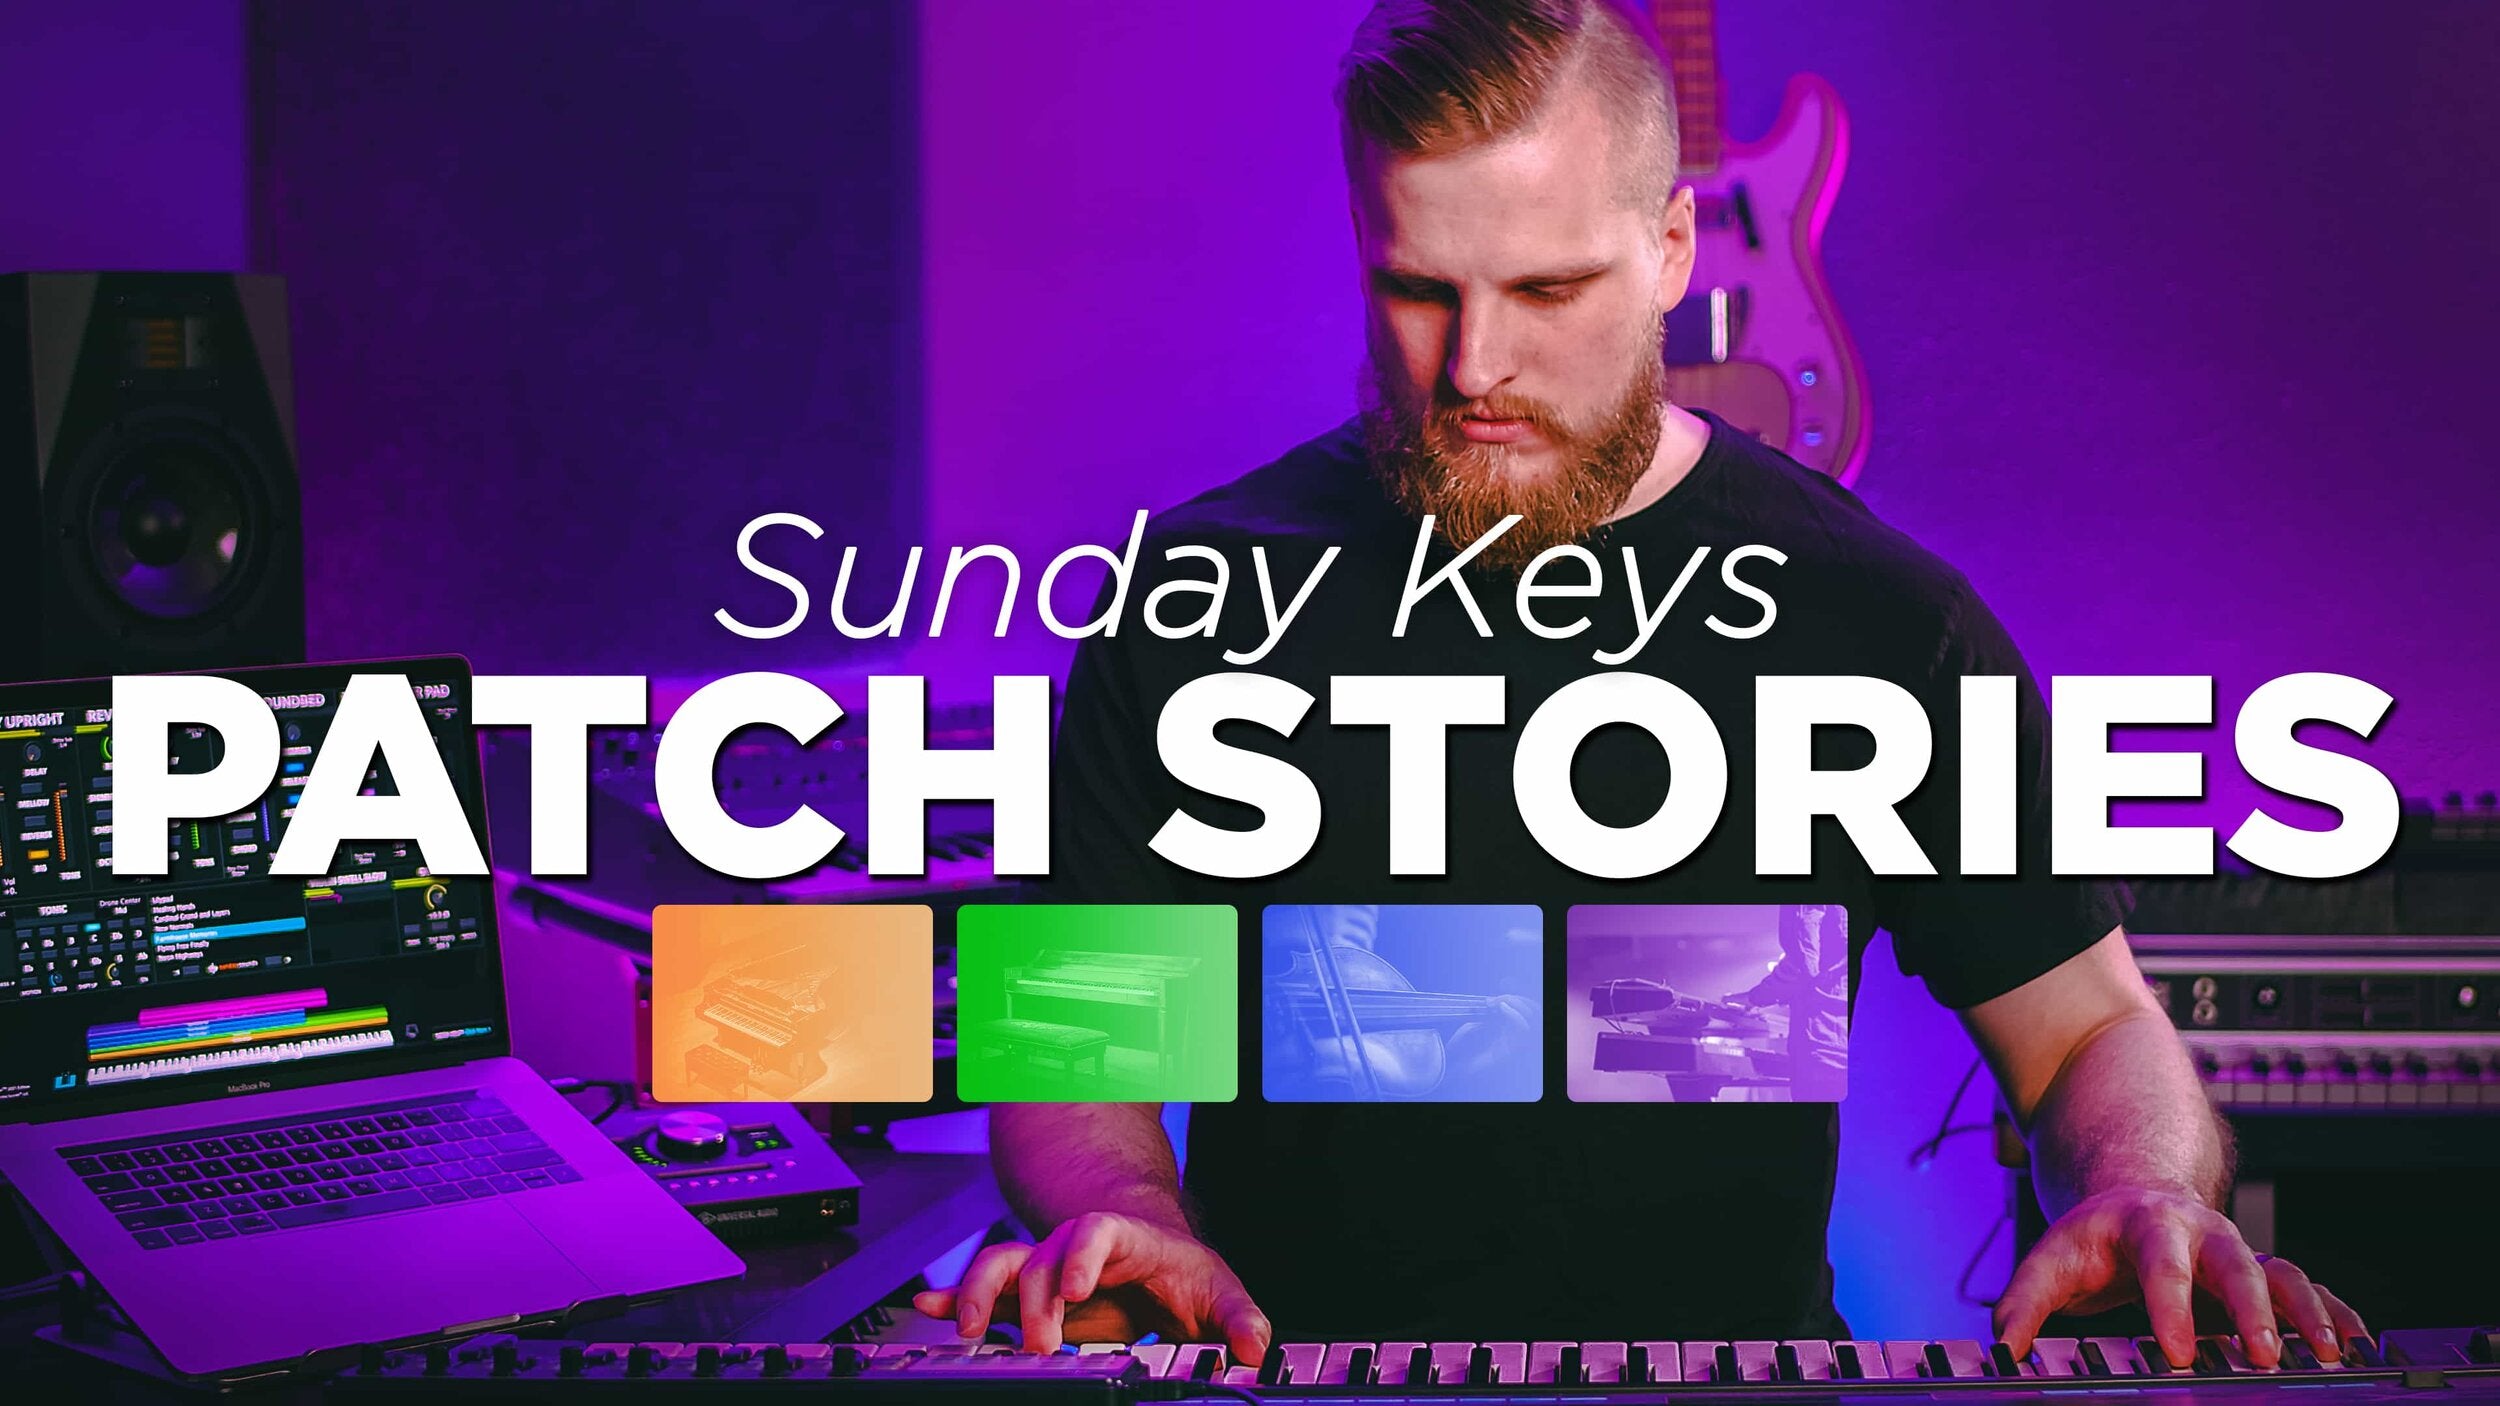 Patch Stories - Sunday Keys 2021 Behind the Scenes!